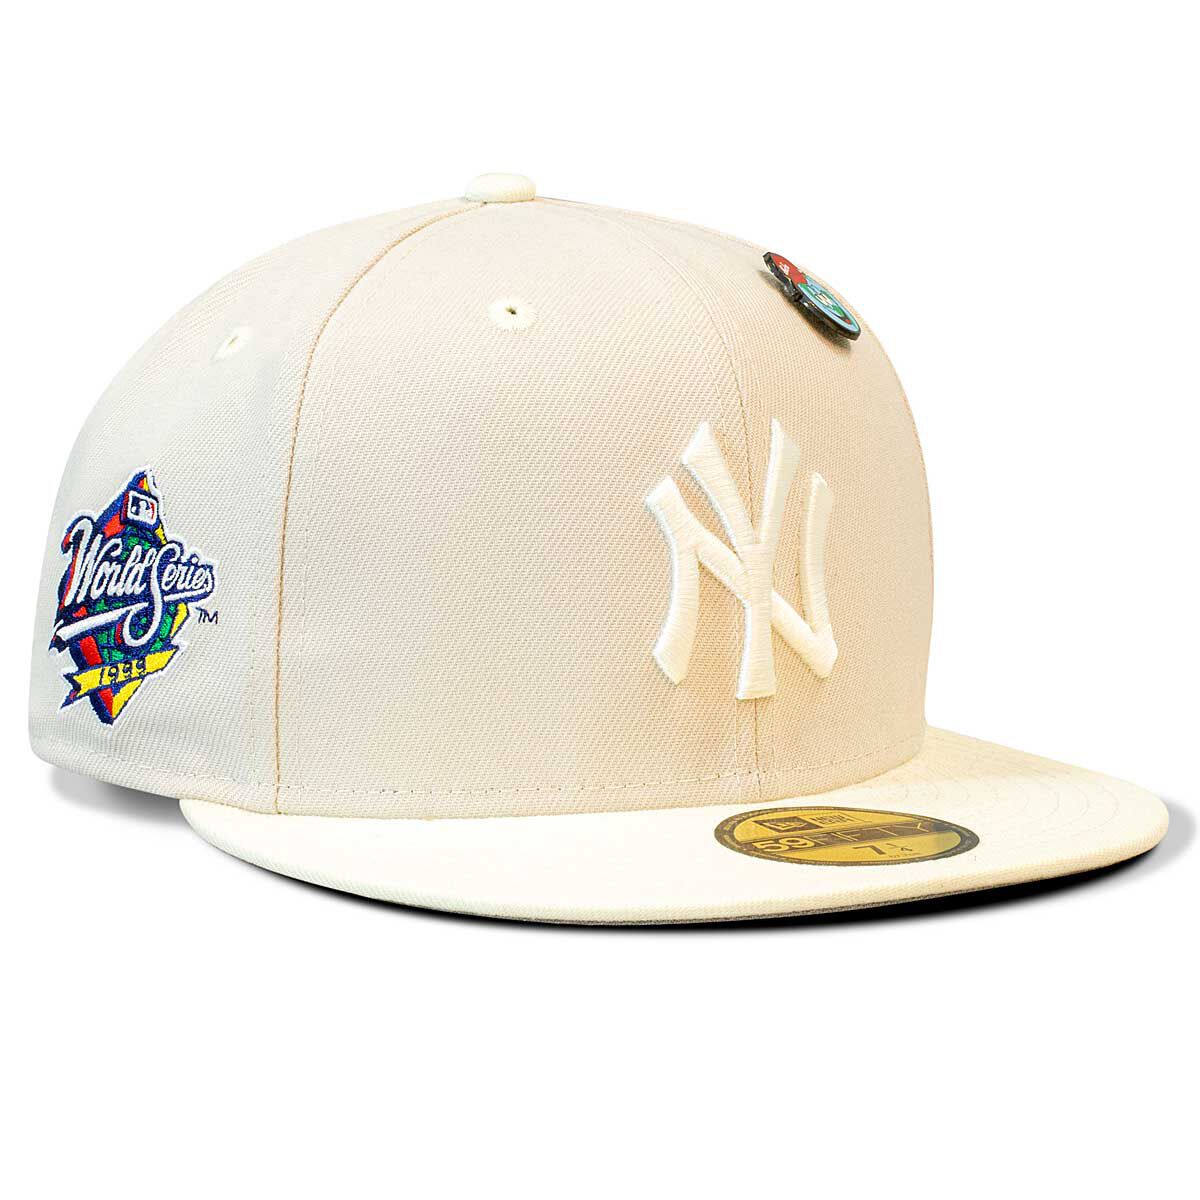 NEW ERA 59FIFTY MLB NEW YORK YANKEES WS PIN BEIGE FITTED CAP